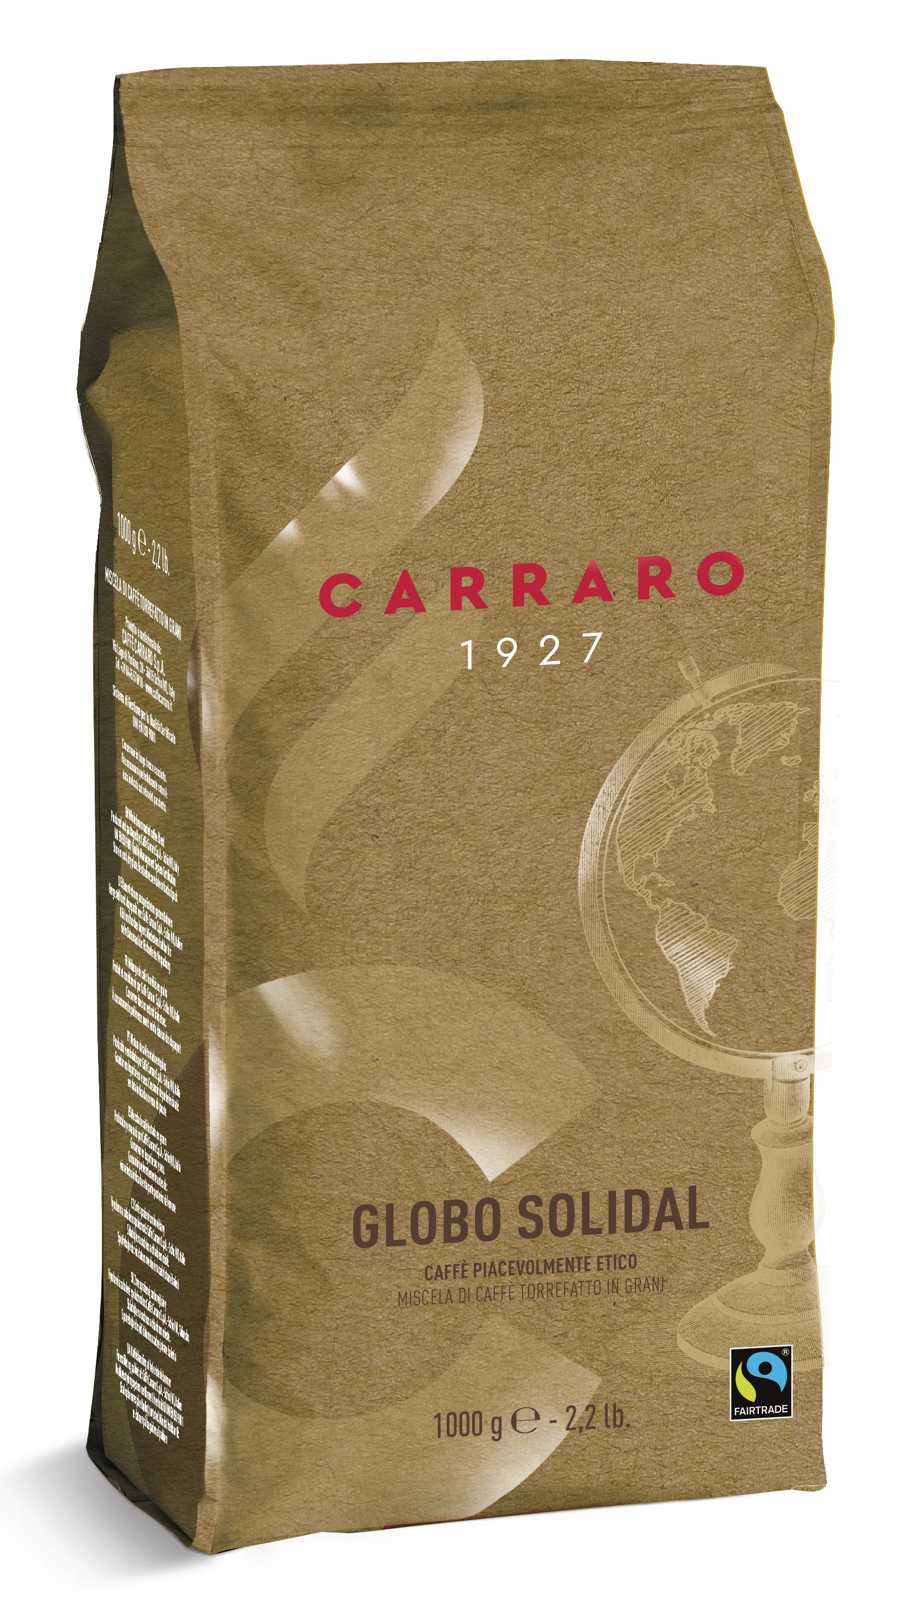 Globo Solidal coffee beans